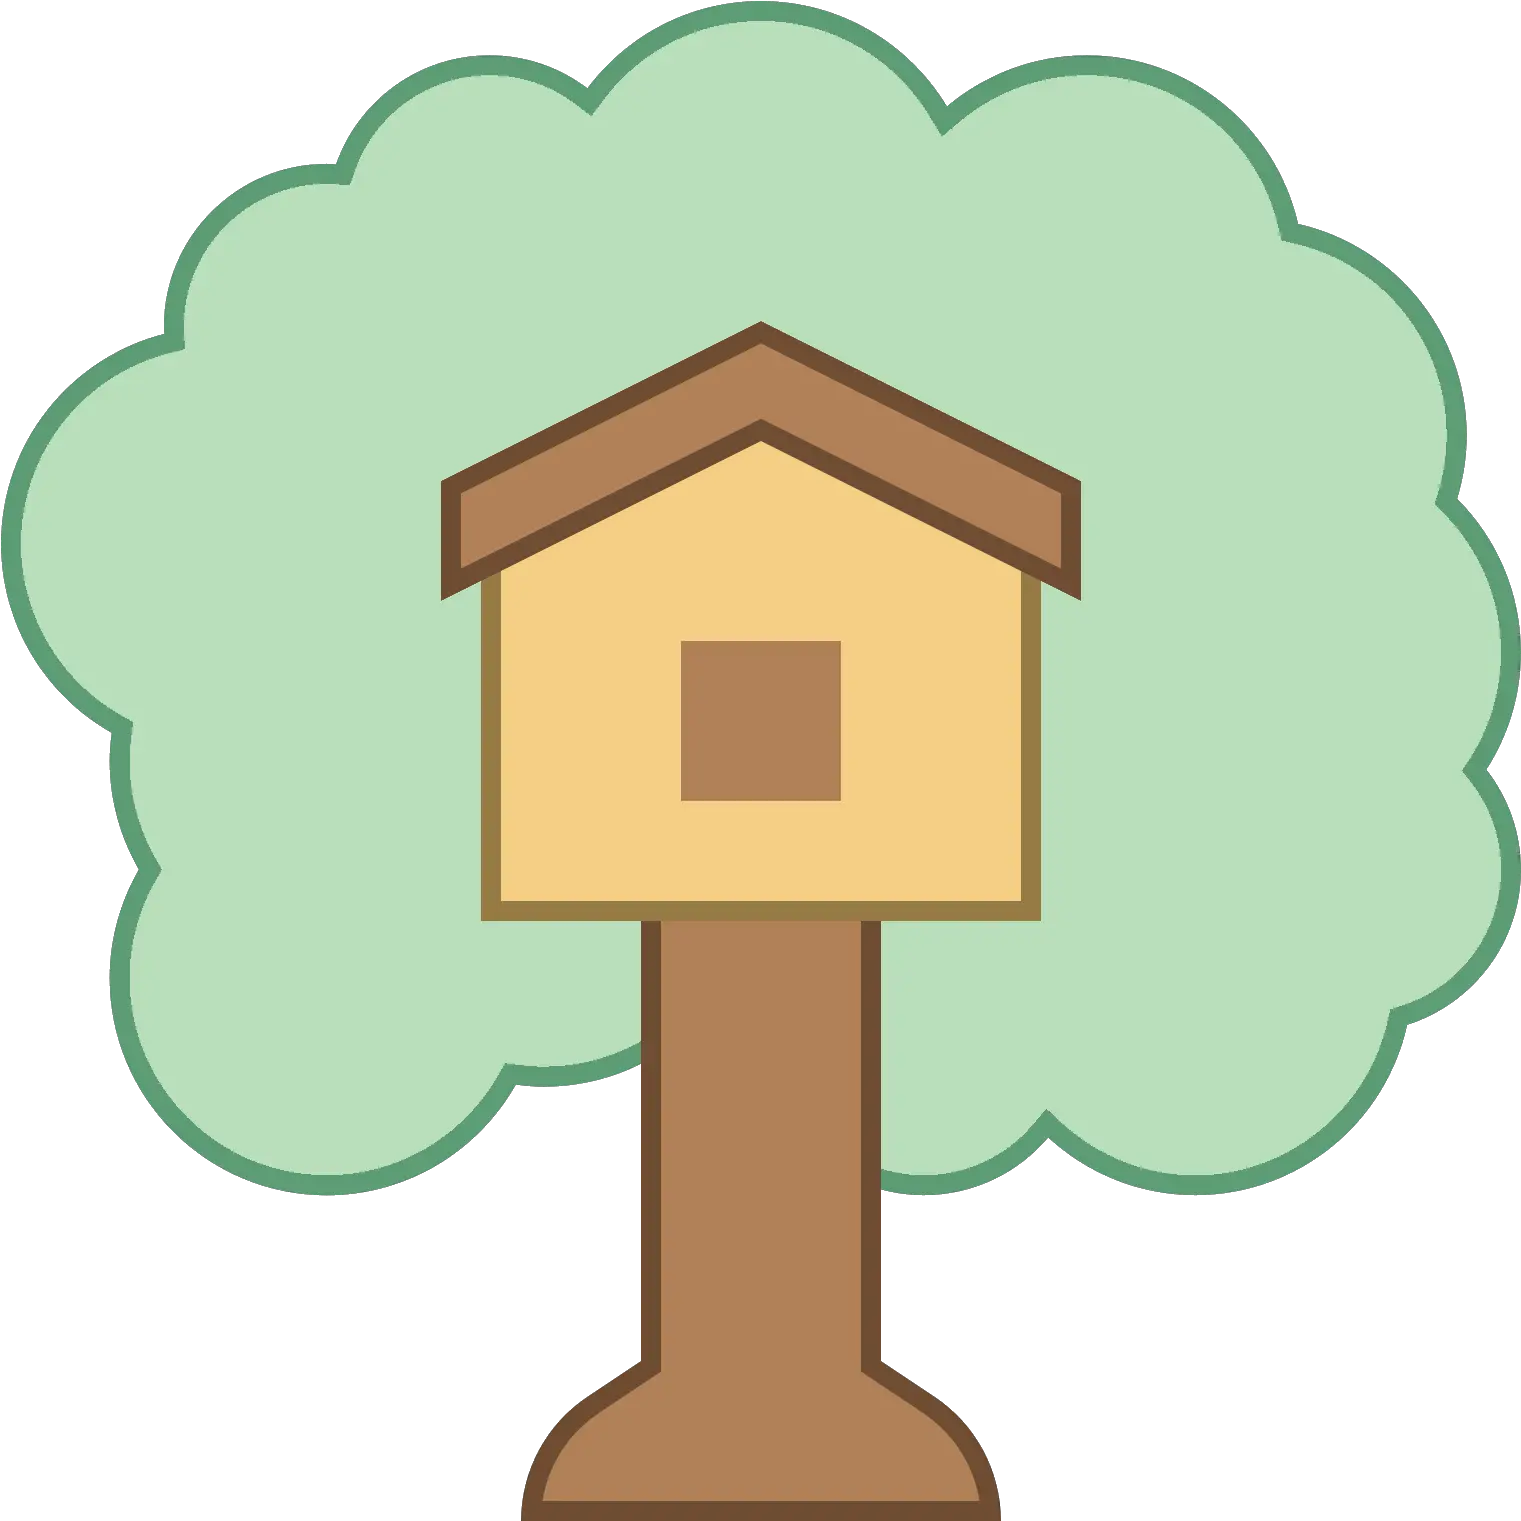 Casa Na Árvore Icon Wink 1600x1600 Png Clipart Download Tree House Icon Png Ore Icon